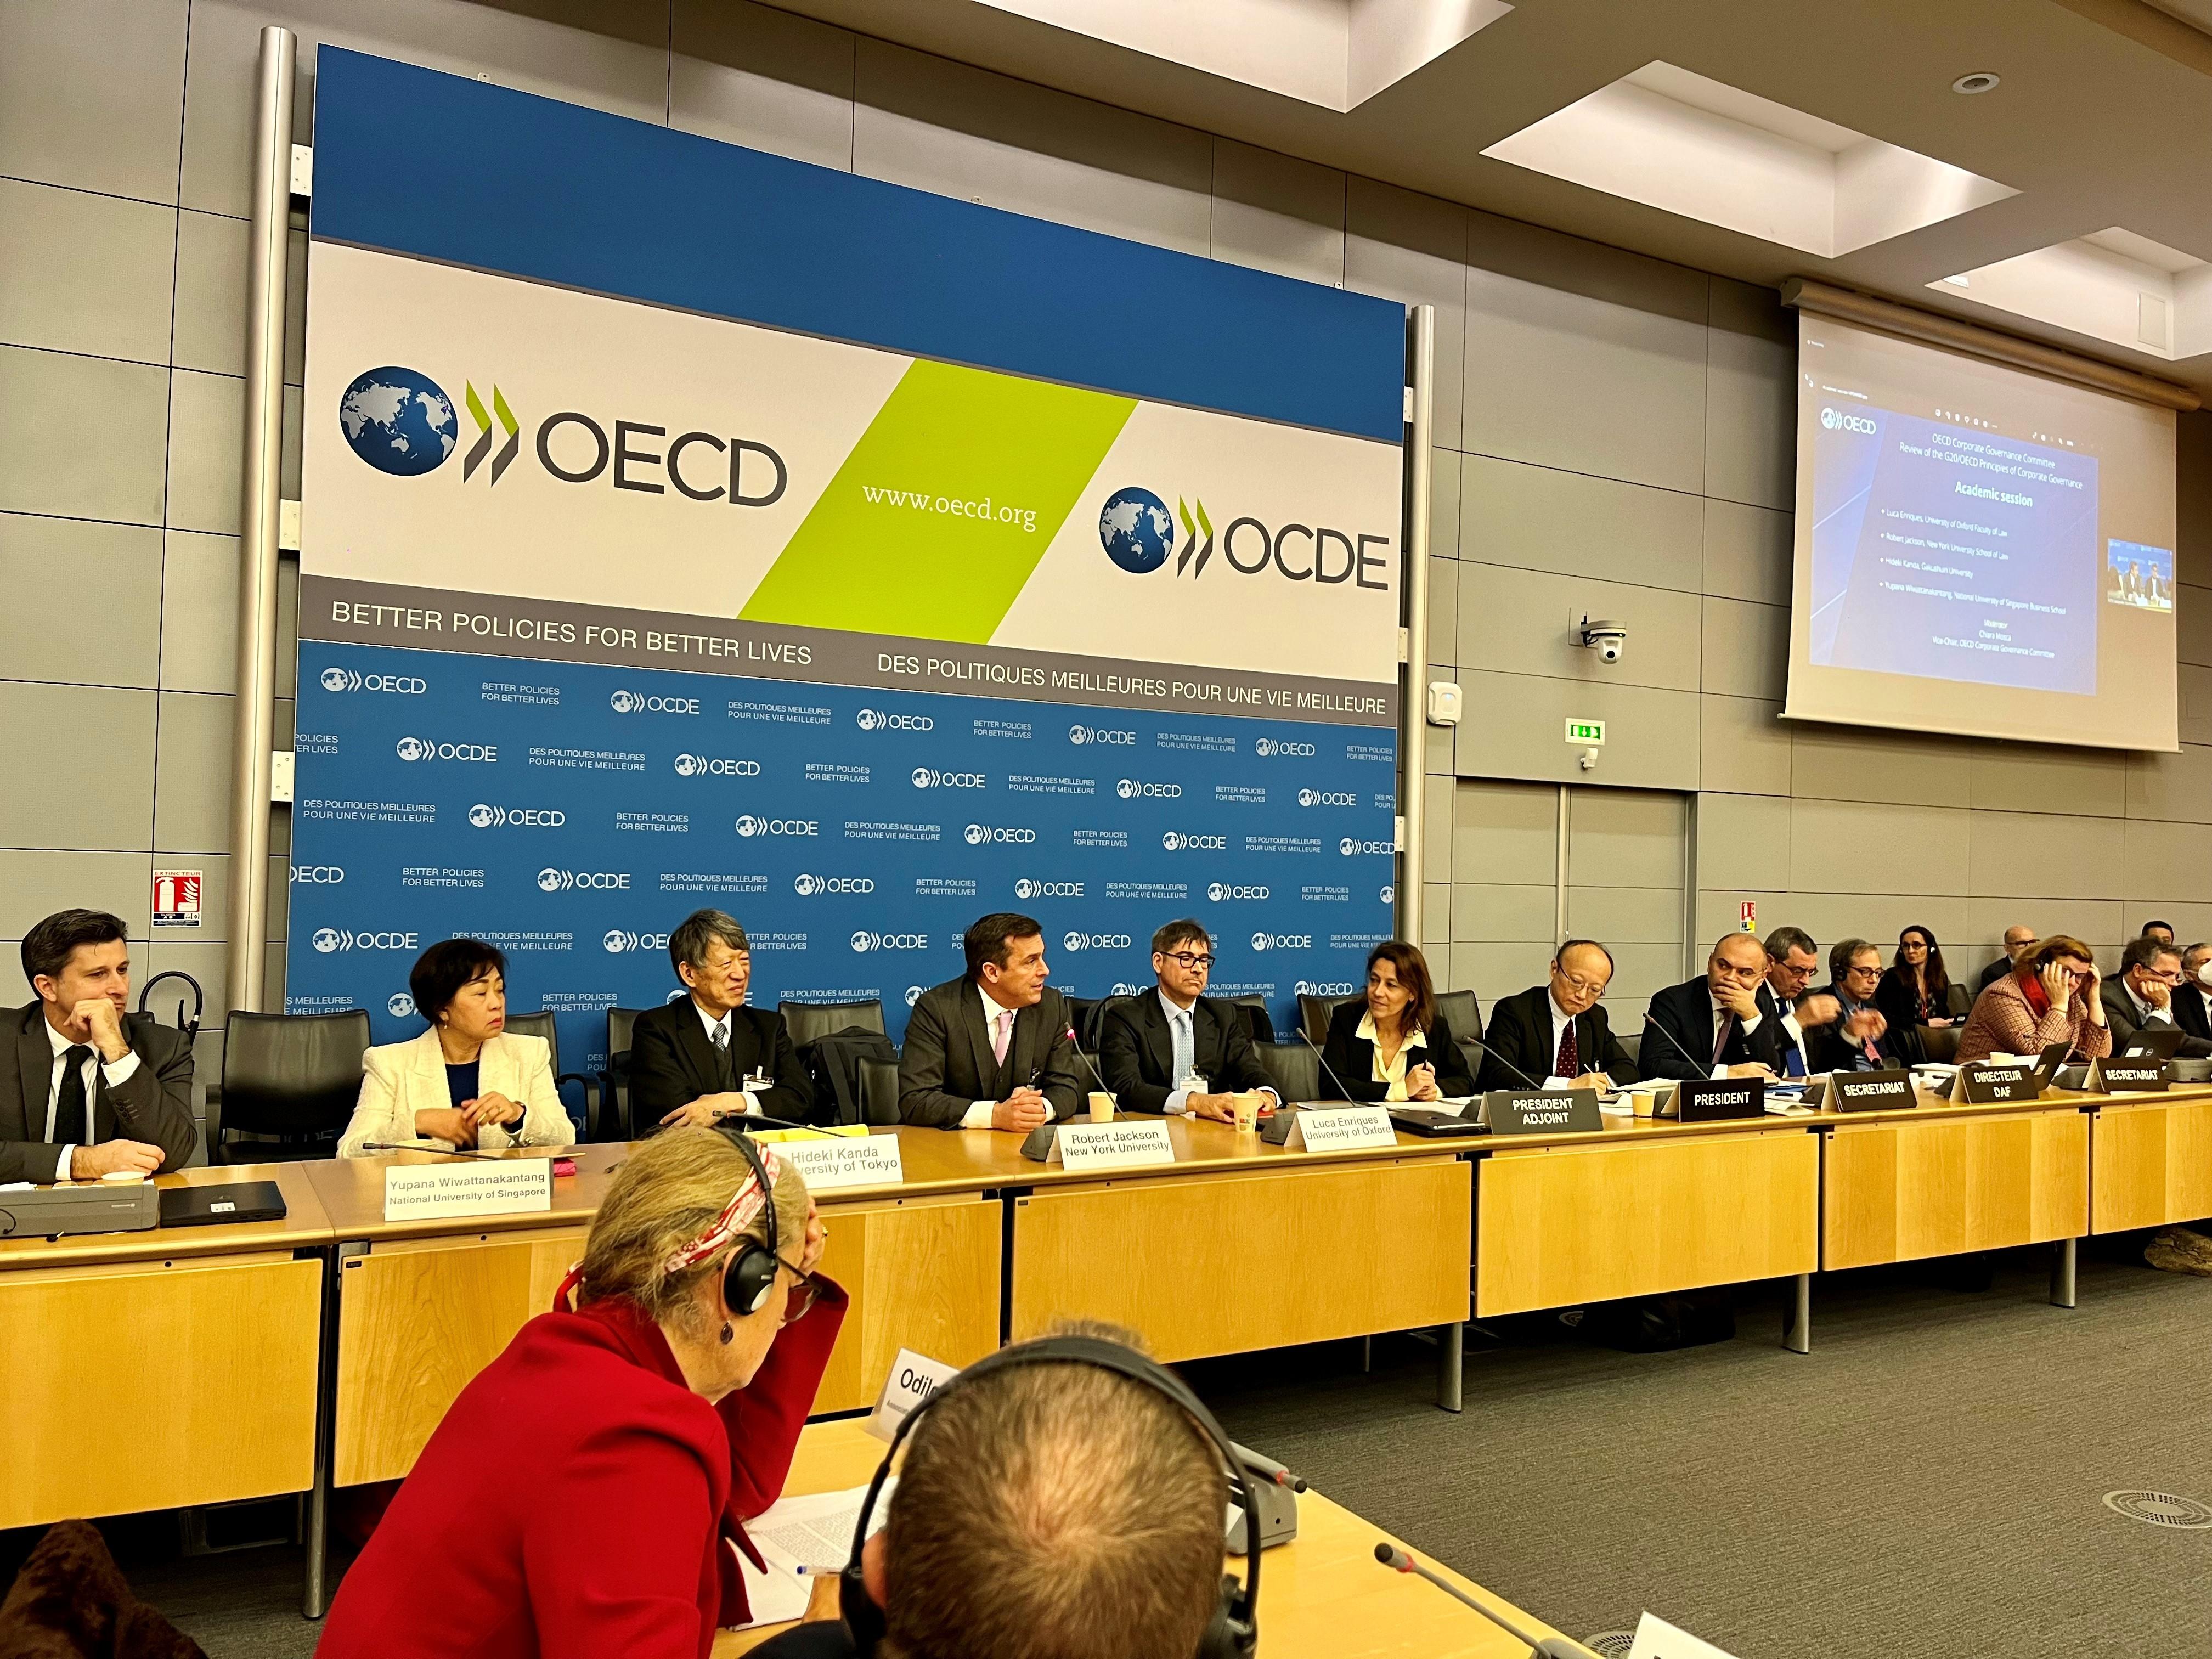 Panel of OECD members including Professor Luca Enriques